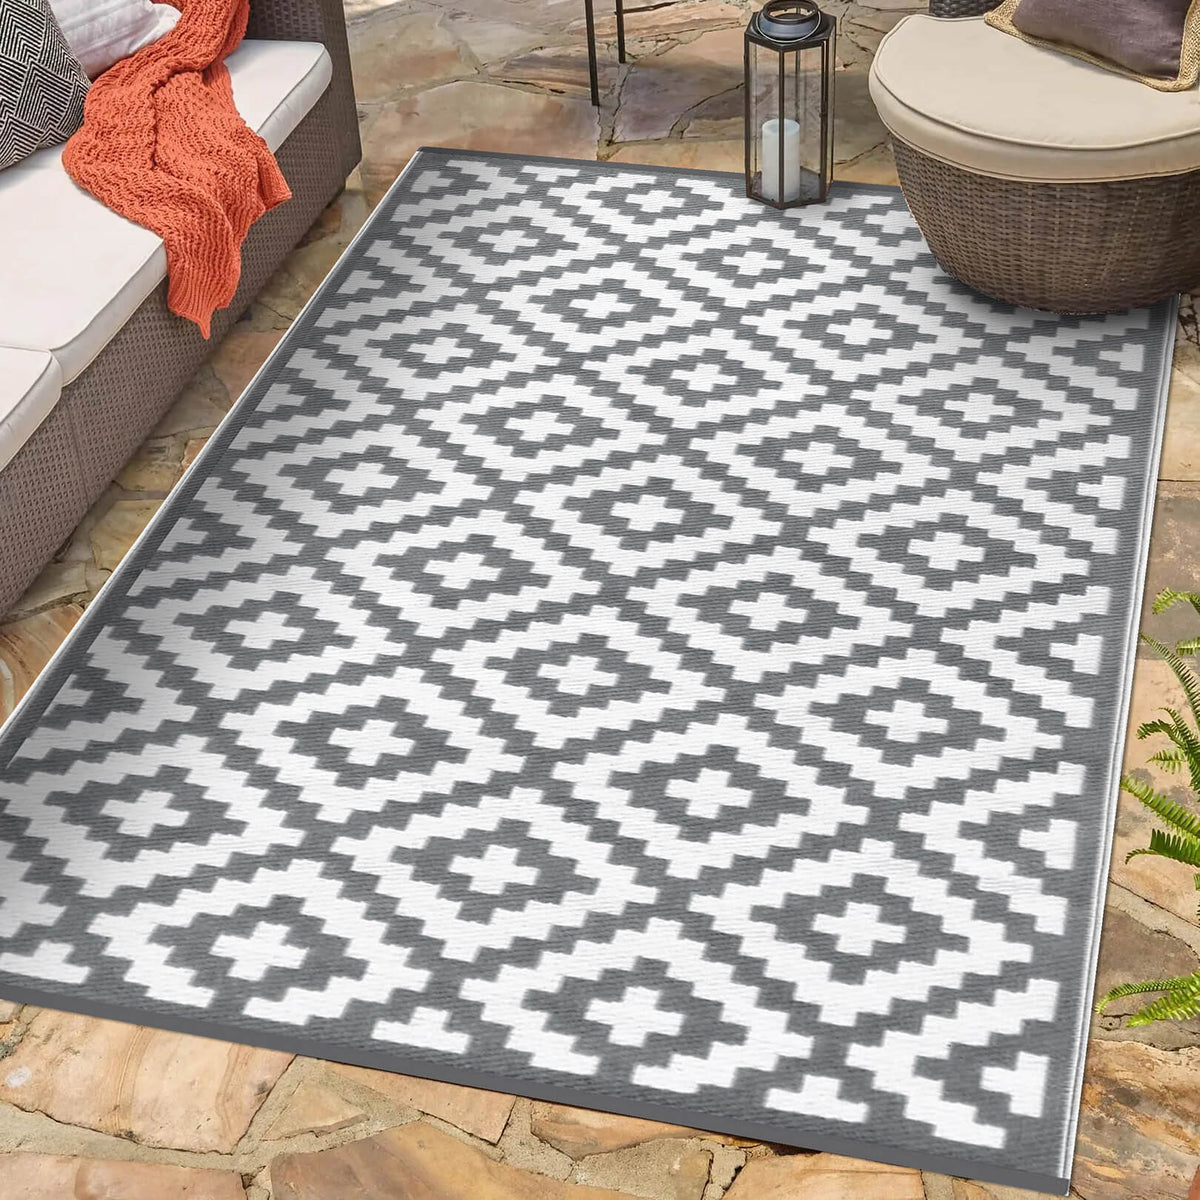 270 x 360 cm (9 x 12ft) Extra-large Outdoor Rugs